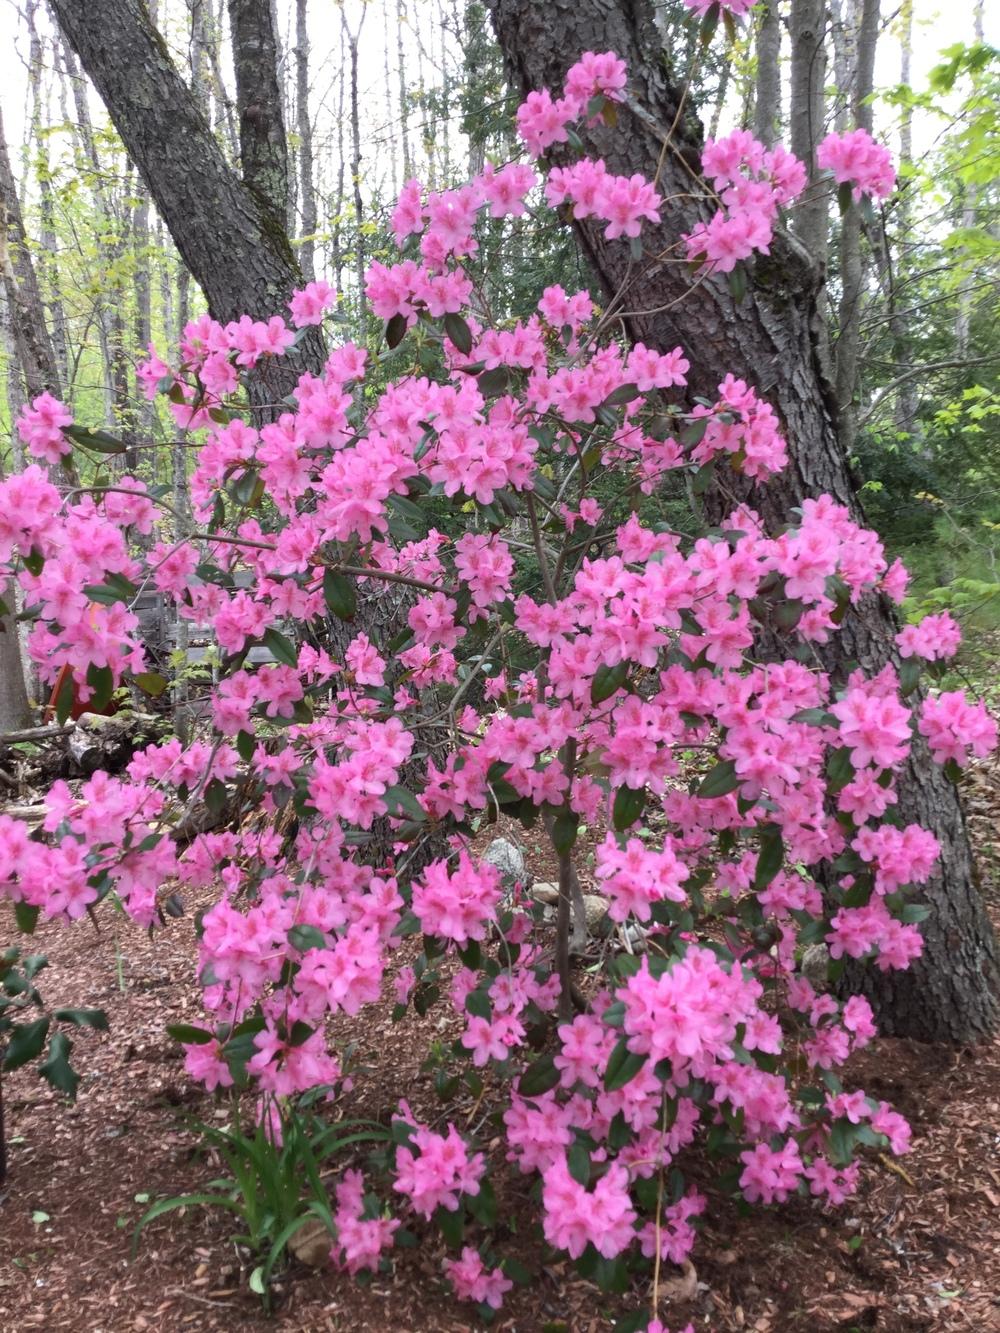 Photo of Rhododendrons (Rhododendron) uploaded by robertduval14